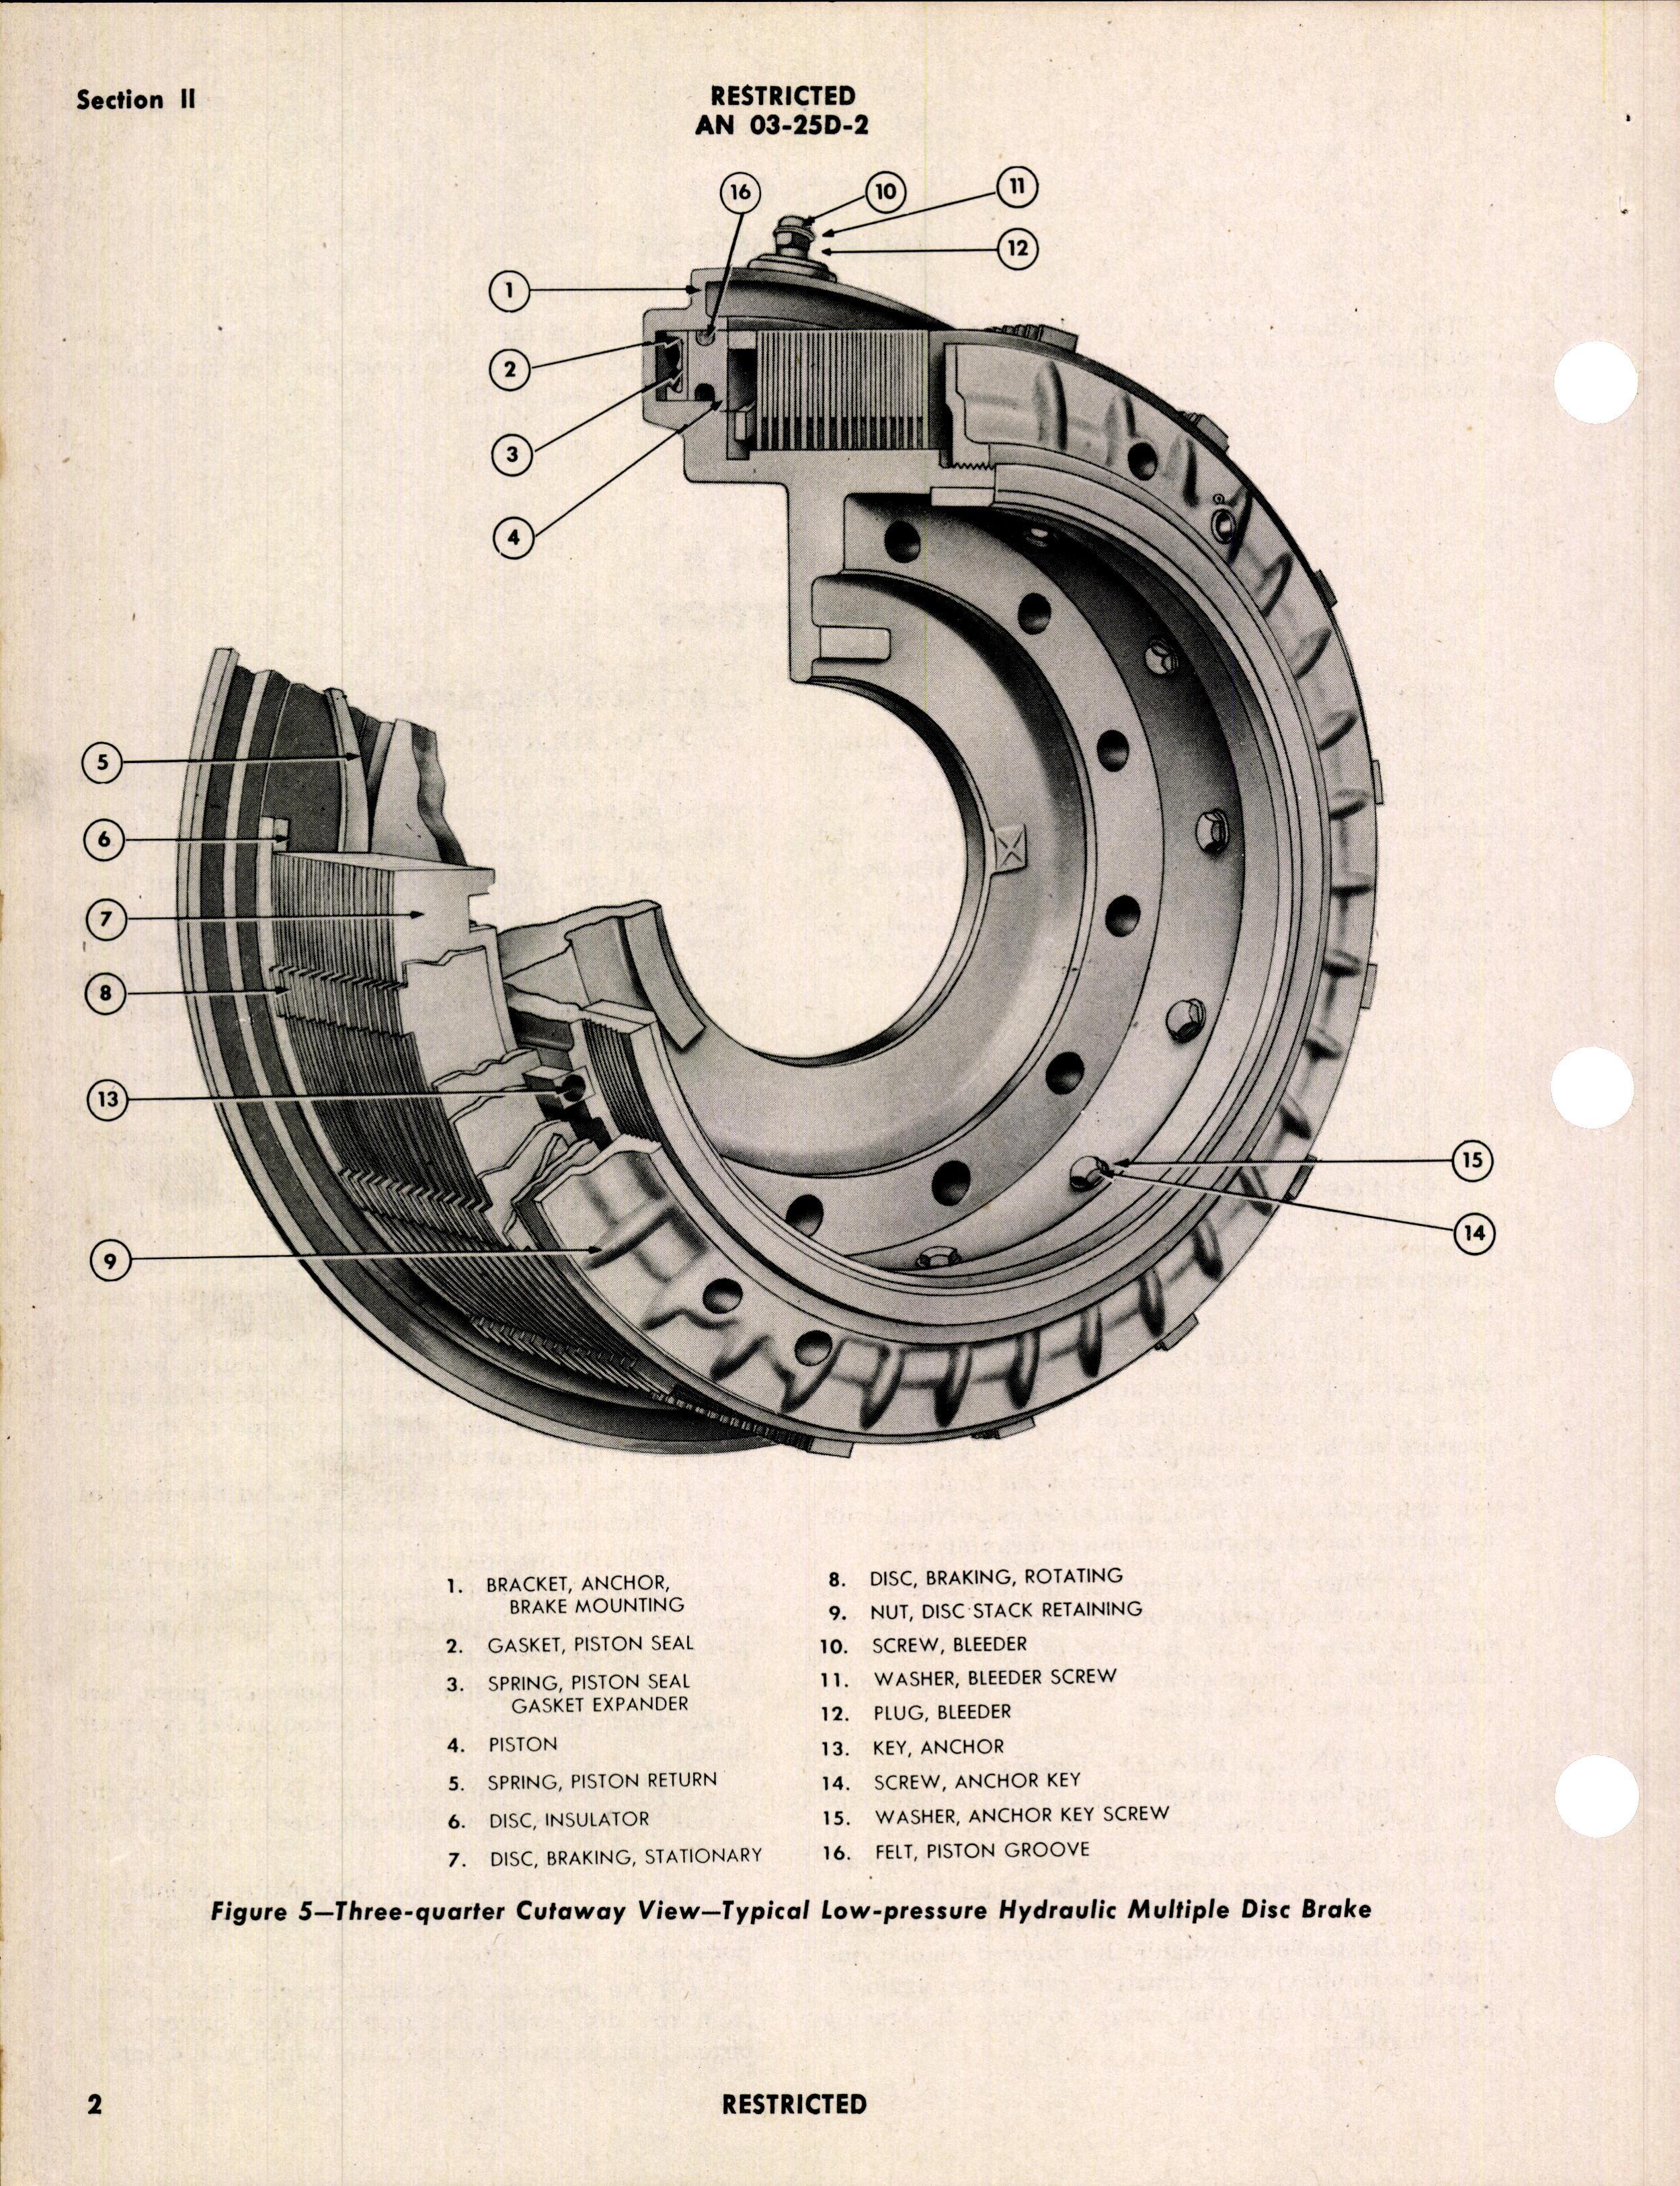 Sample page 8 from AirCorps Library document: Operation, Service, & Overhaul Instructions with Parts Catalog for Goodyear Multiple Disc Brakes